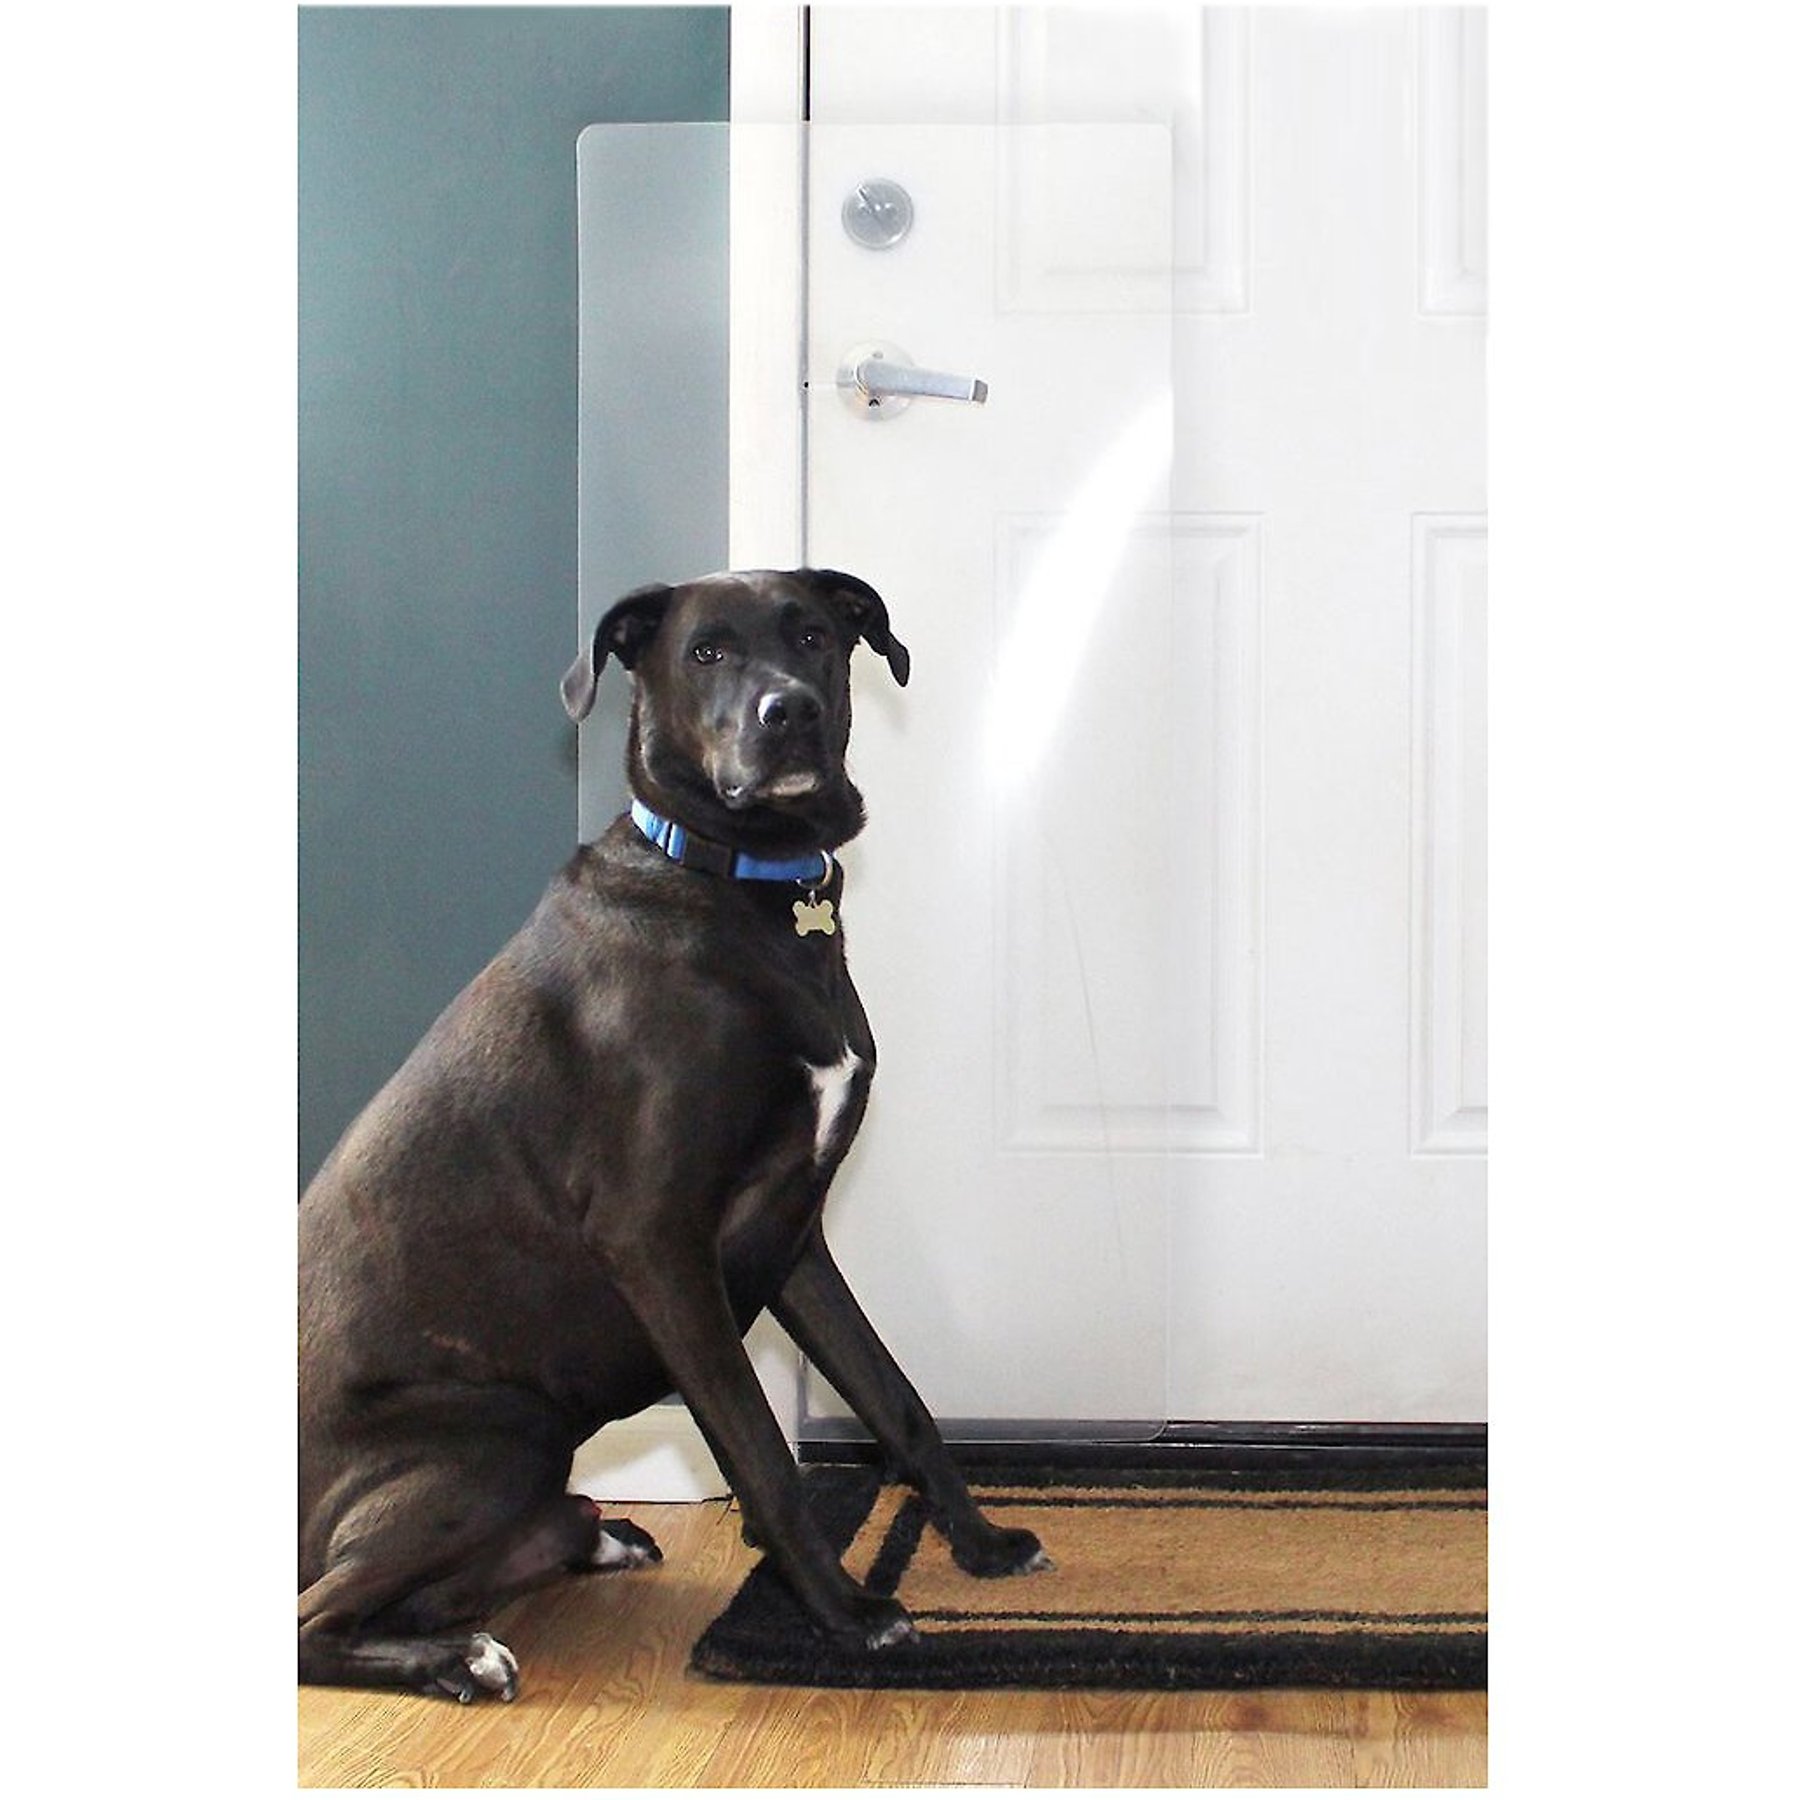 CLAWGUARD Heavy Duty Big Dog Scratch Shield - Ultimate Door, Frame and Wall Protection